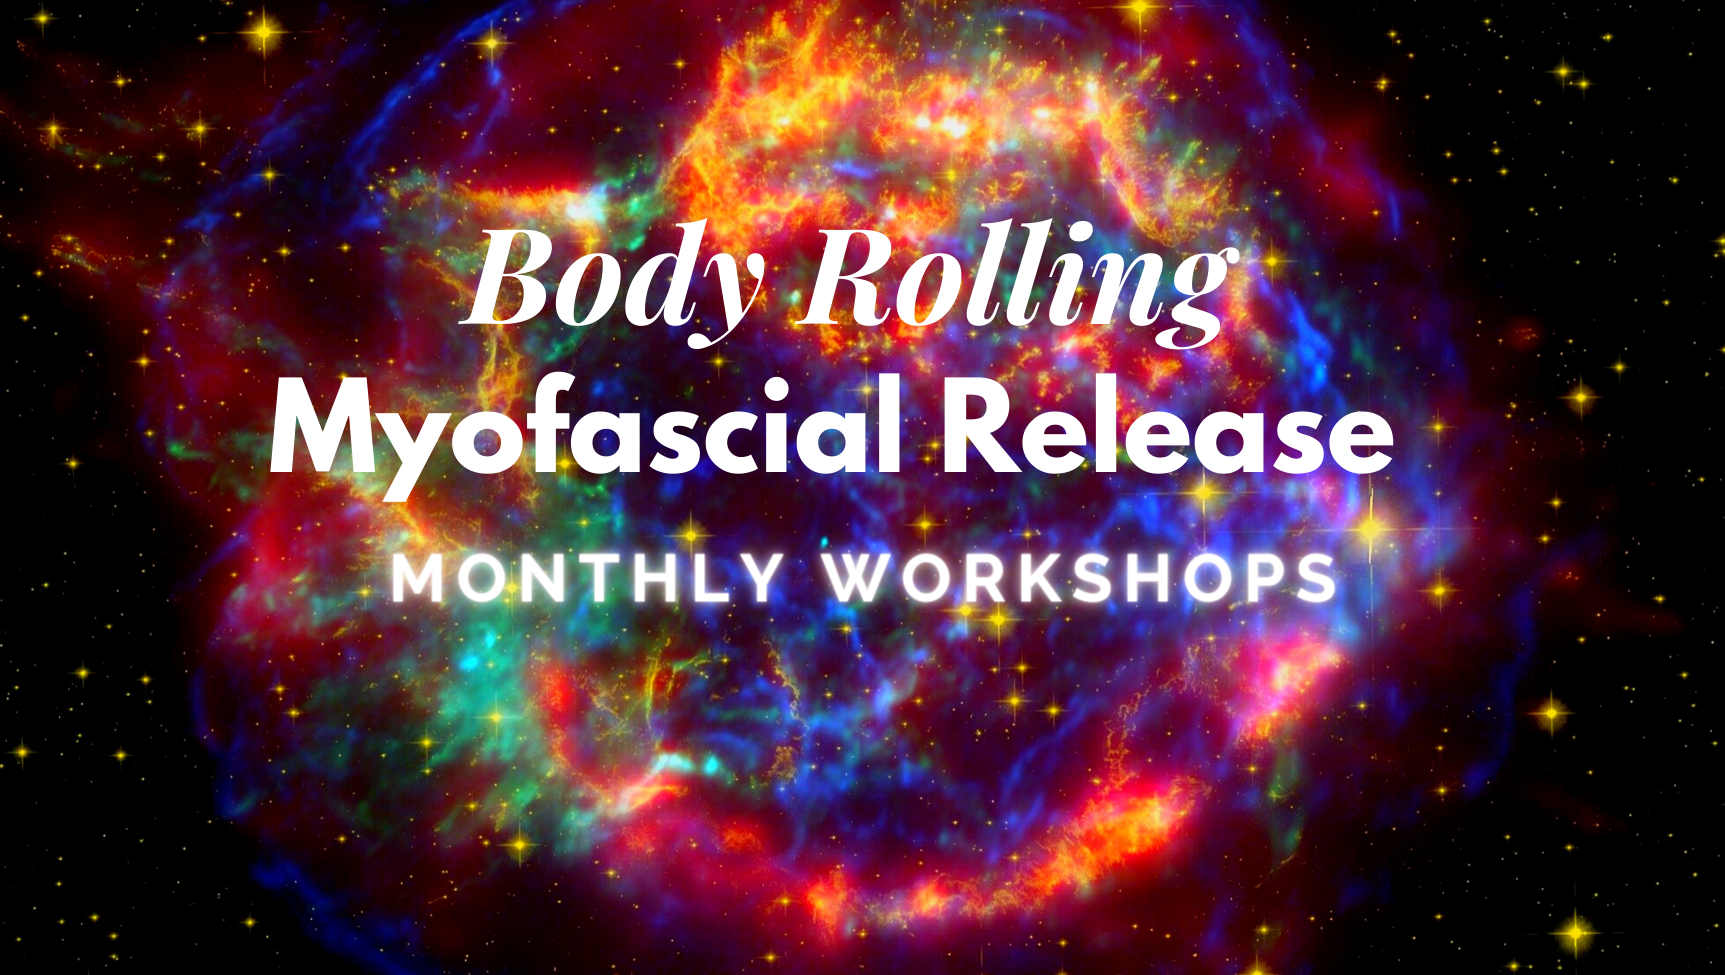 Private Yoga Instructor Santa Monica Los Angeles Why I Love Body Rolling Myofascial Release